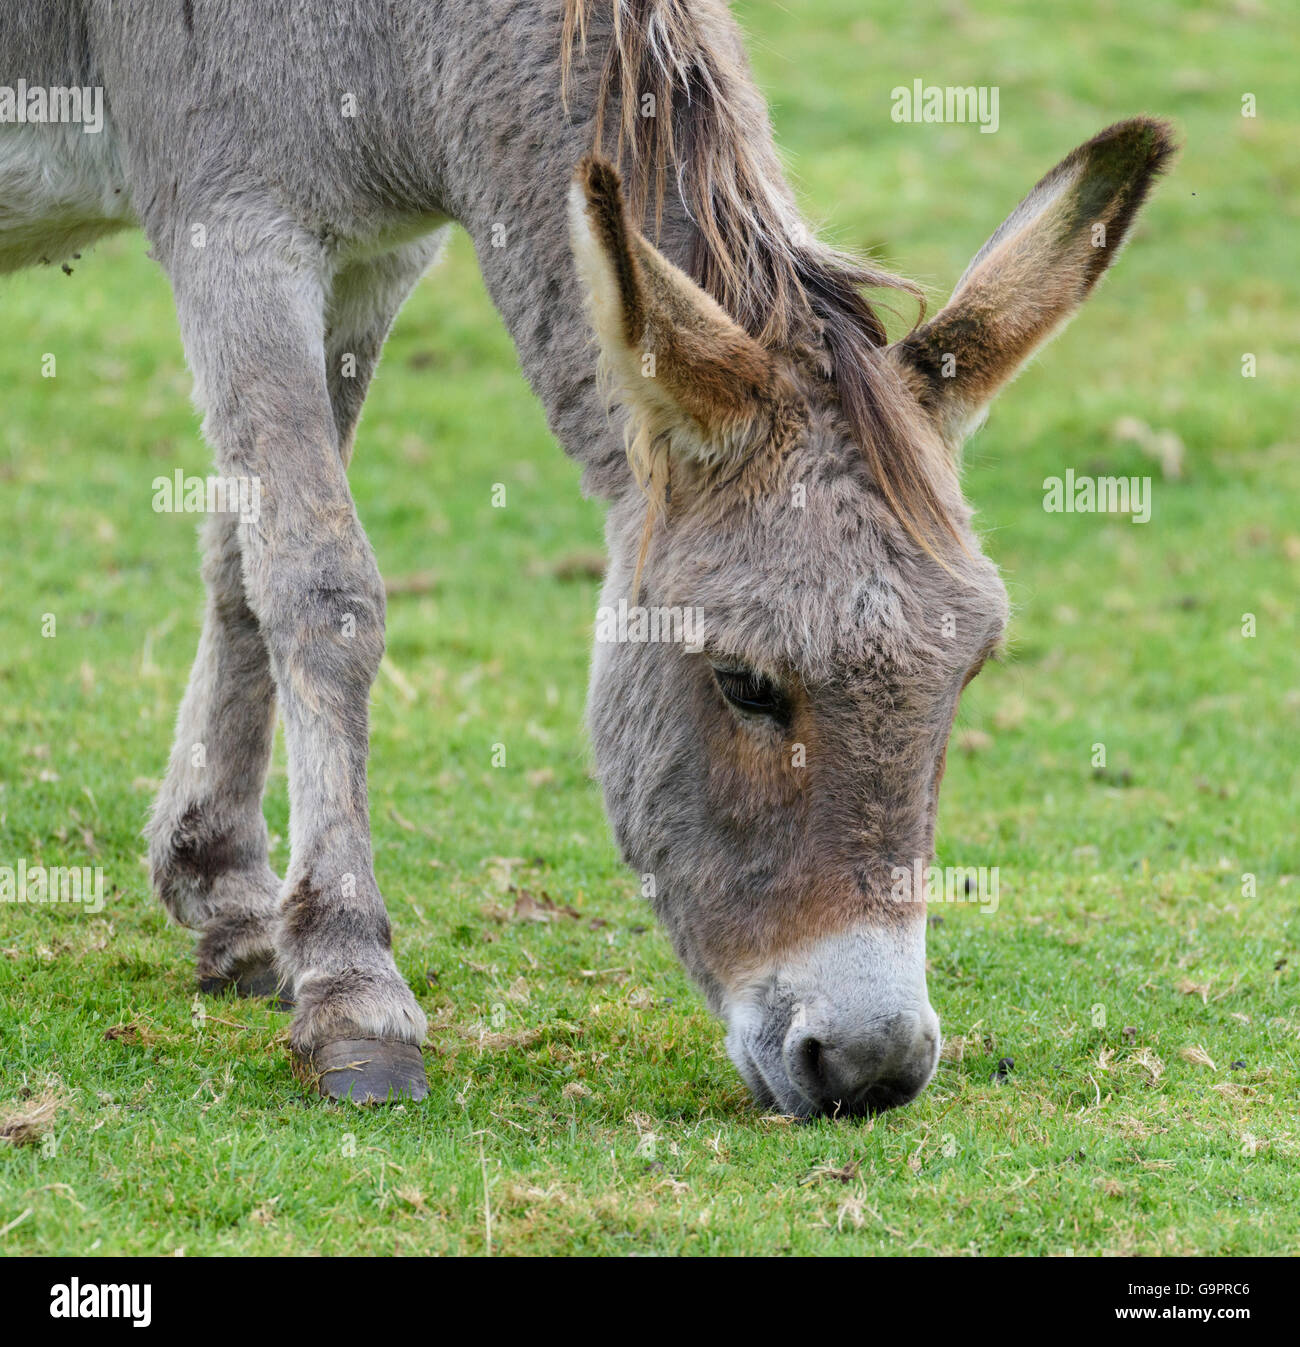 Close-up head and neck shot of a grey donkey with a white muzzle grazing on green grass Stock Photo